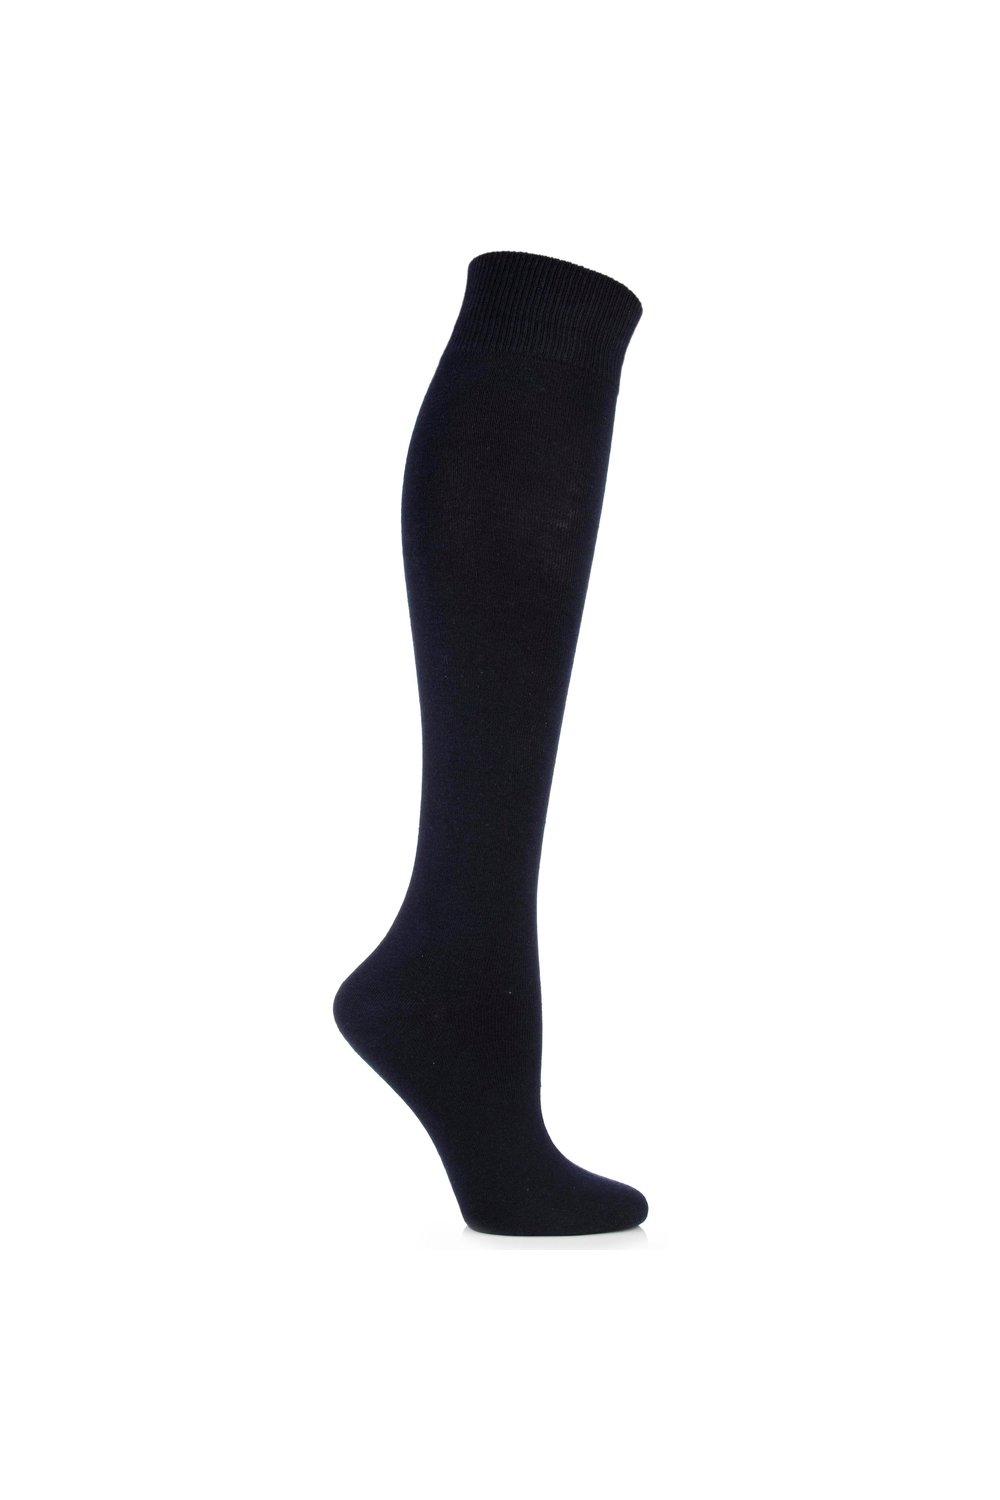 2 Pair Plain and Striped Cotton Knee Highs